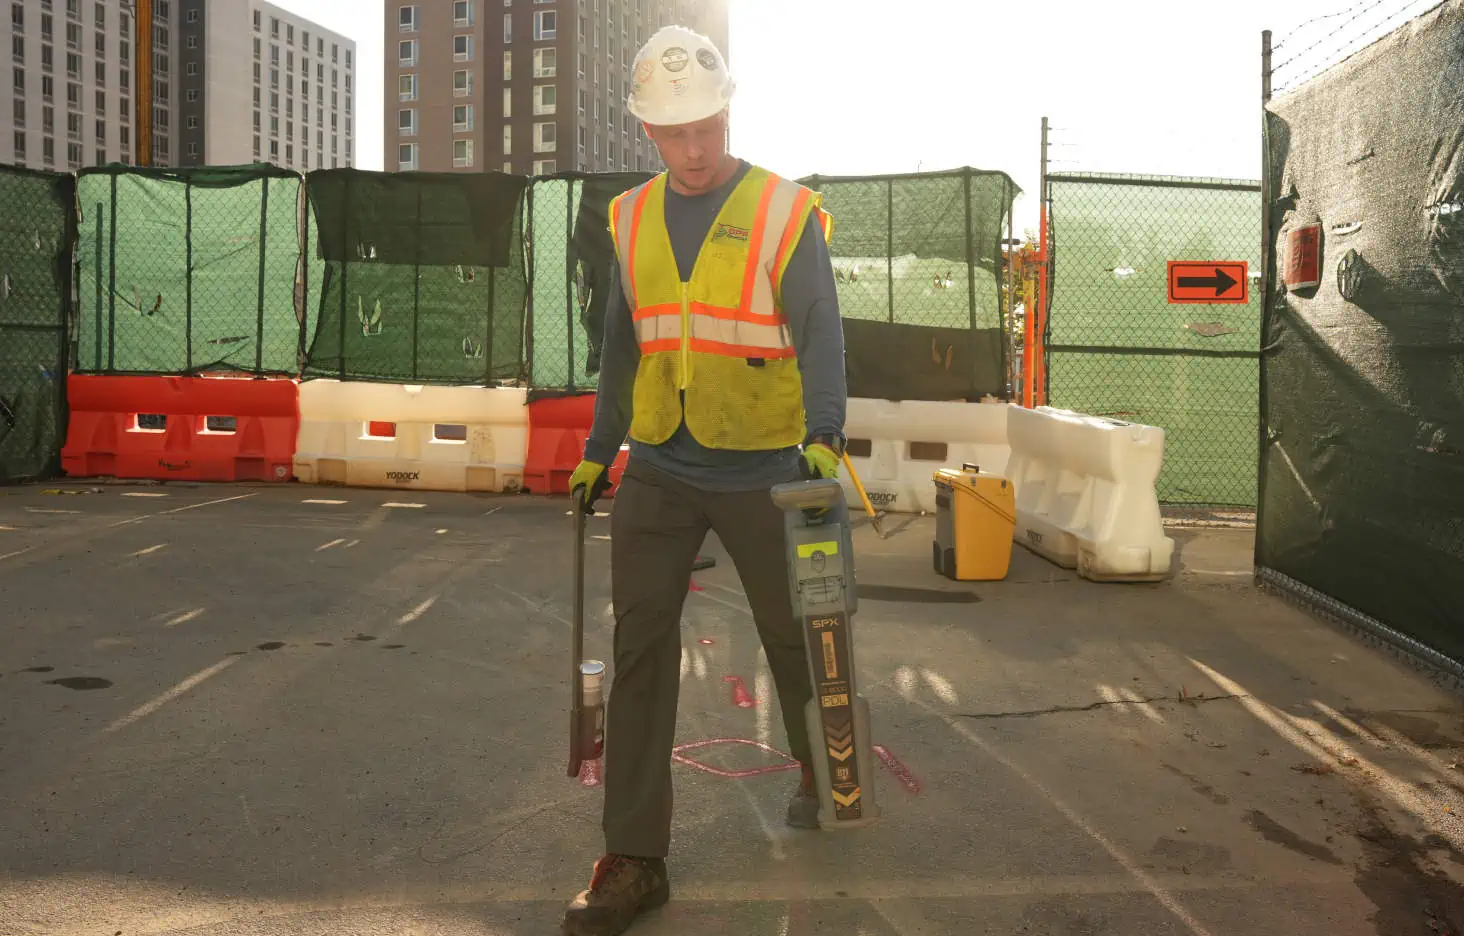 GPR Expert Mapping Utilities in City Construction Zone